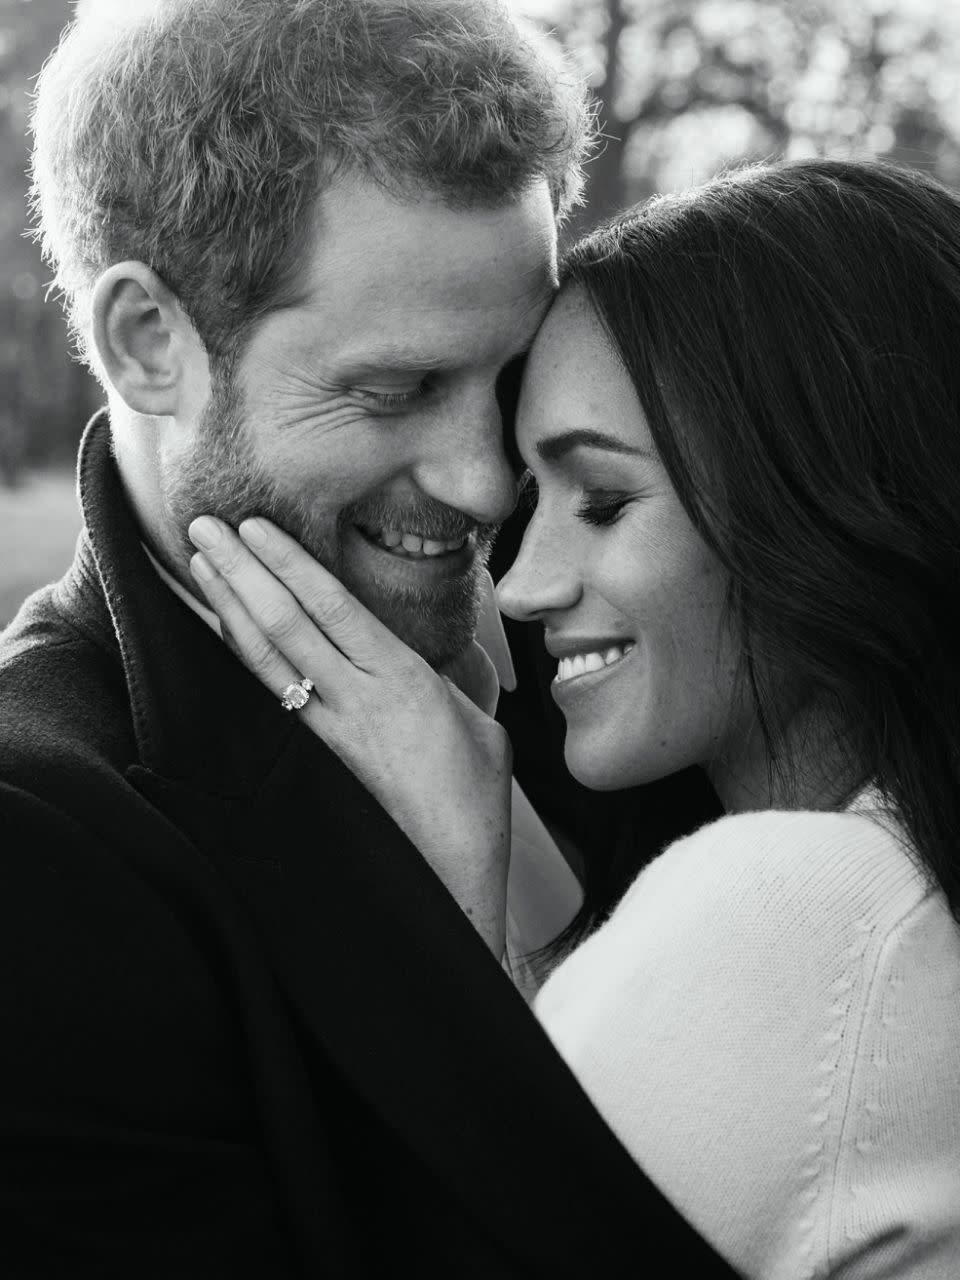 Harry and Meghan became engaged in November and will marry in May. Photo: Getty